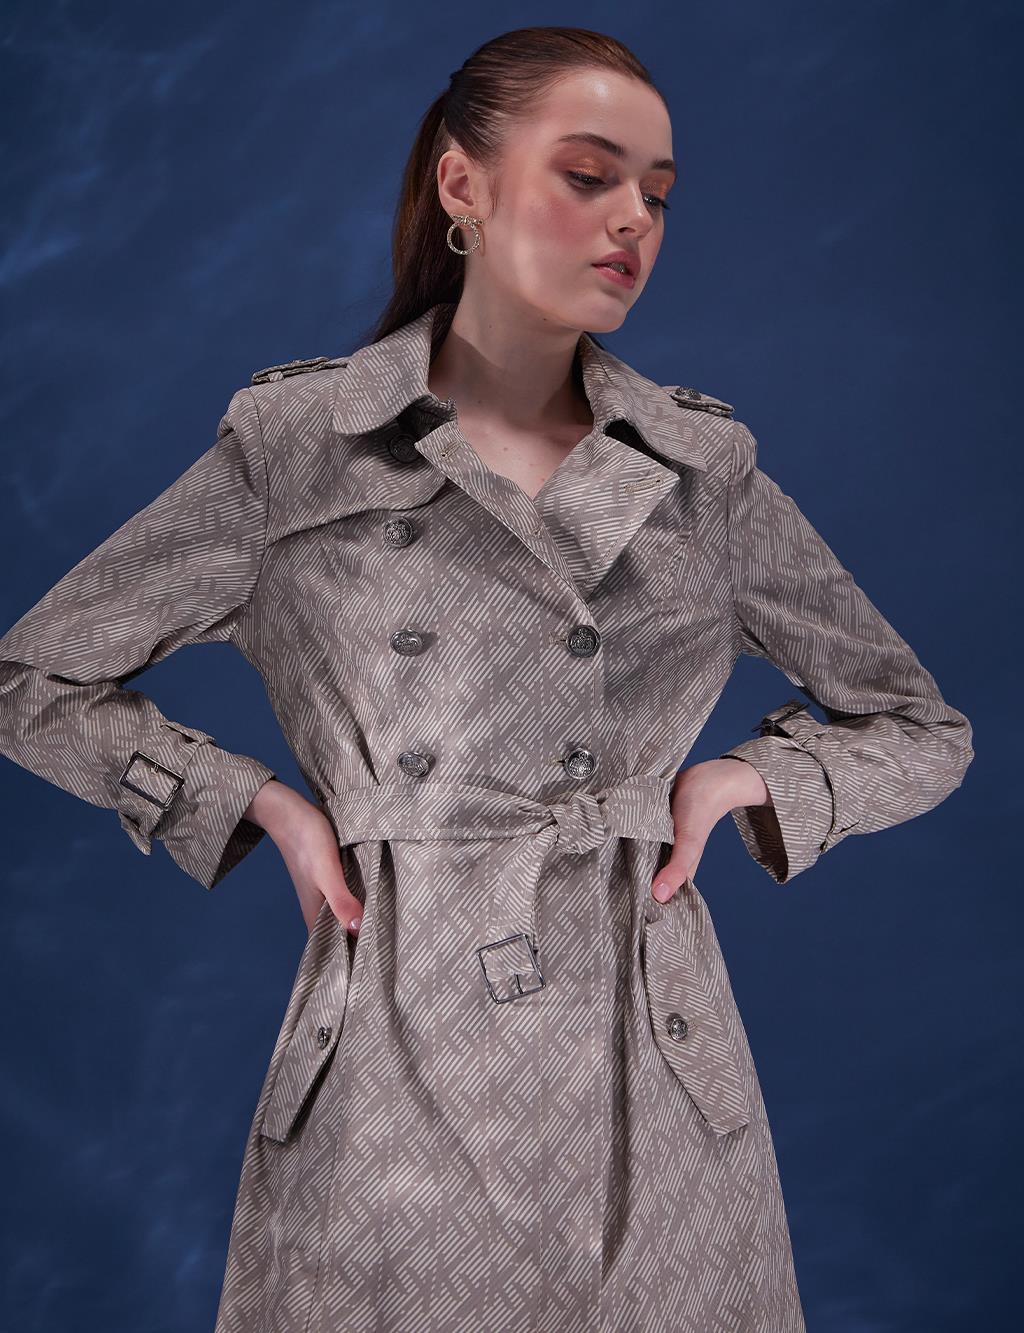 Monogram Pattern Double Breasted Trench Coat Cream